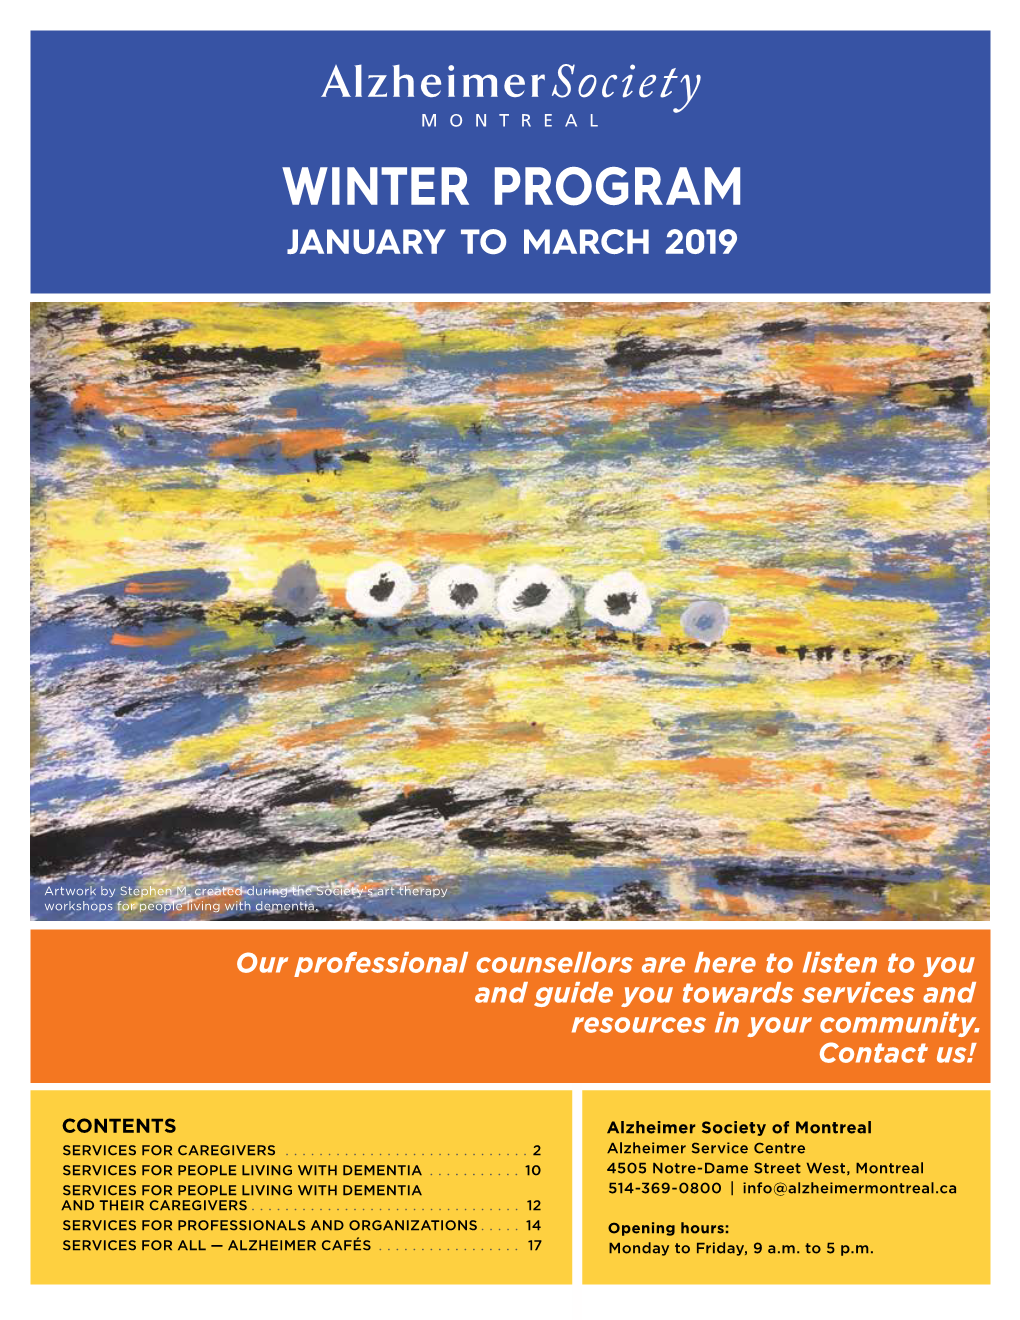 Winter Program January to March 2019